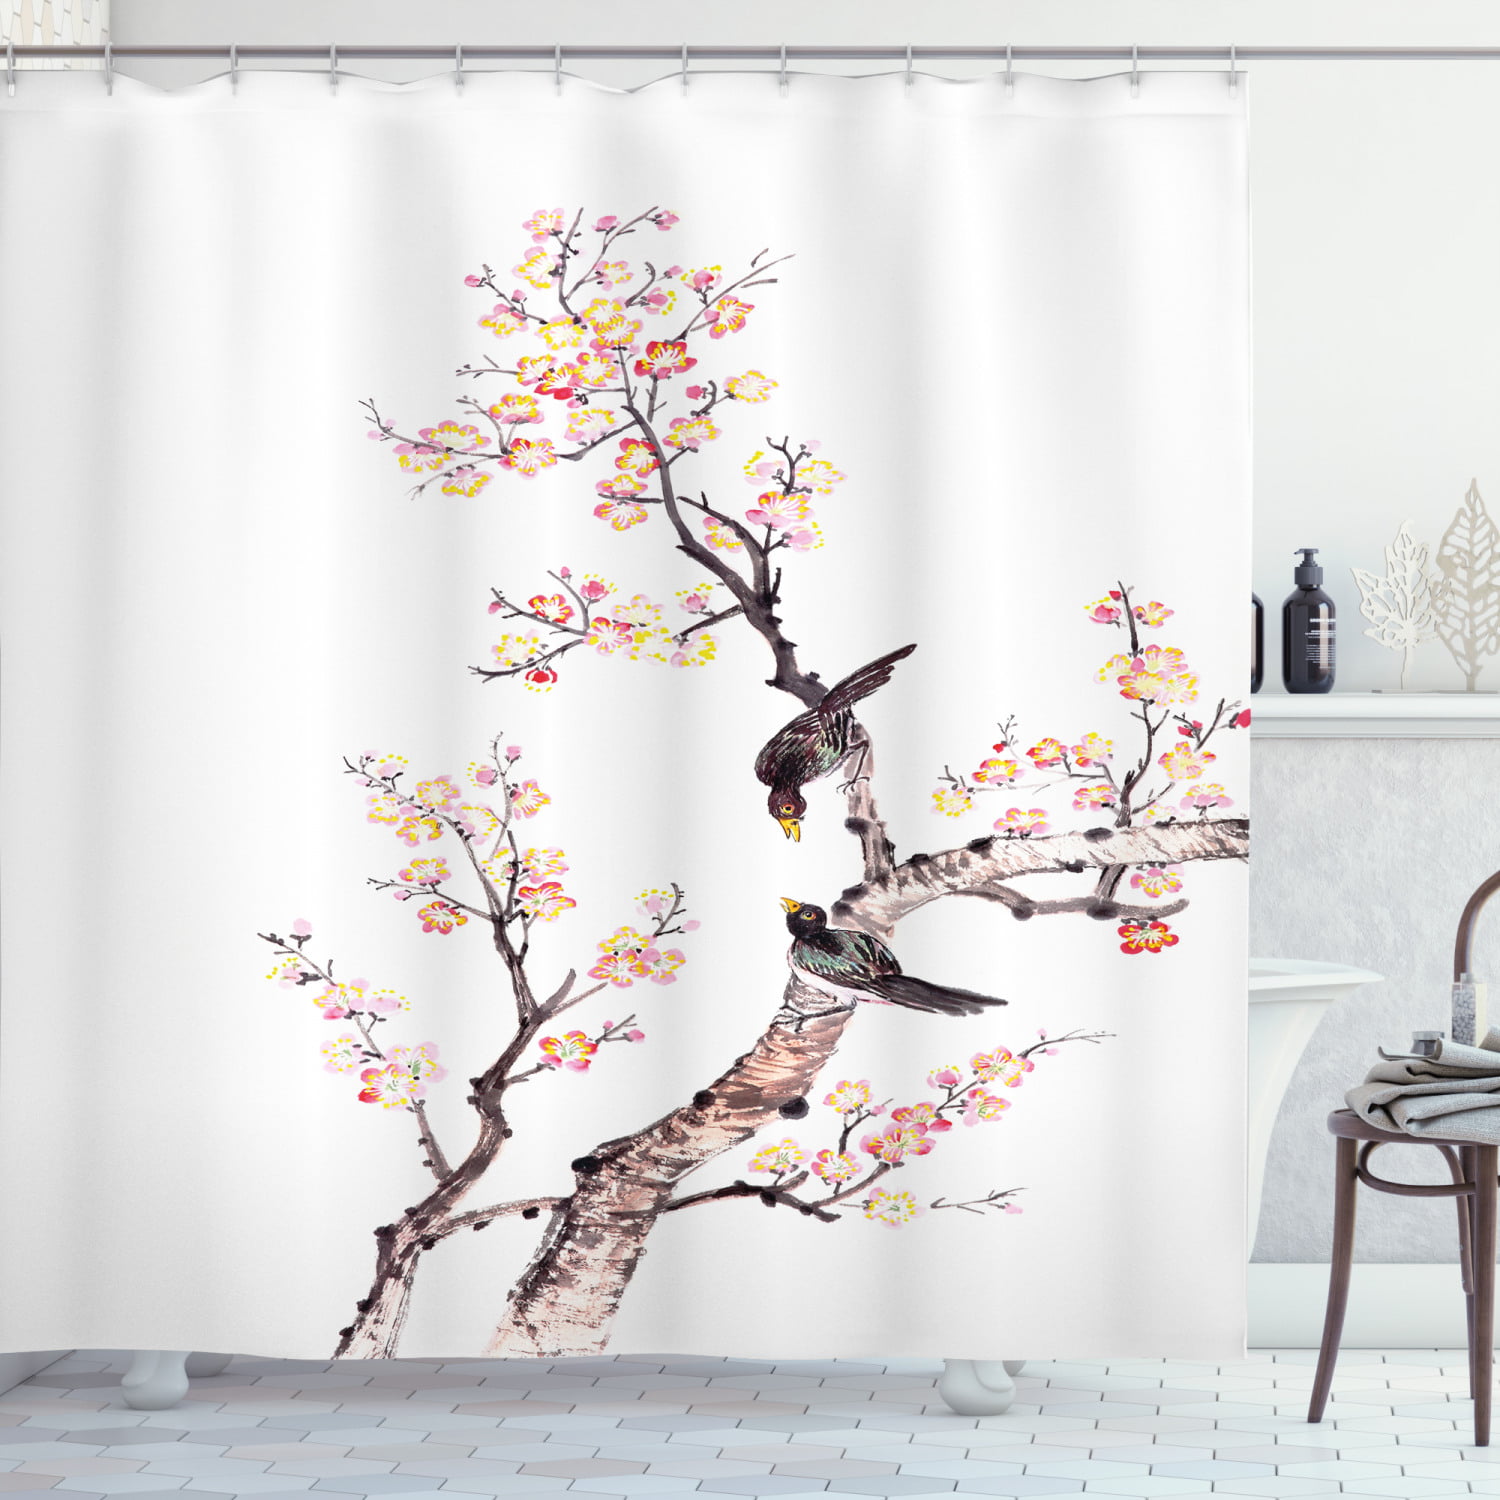 Plum Blossom Pattern Polyester Waterproof Shower Curtain Liner EASY TO CARE